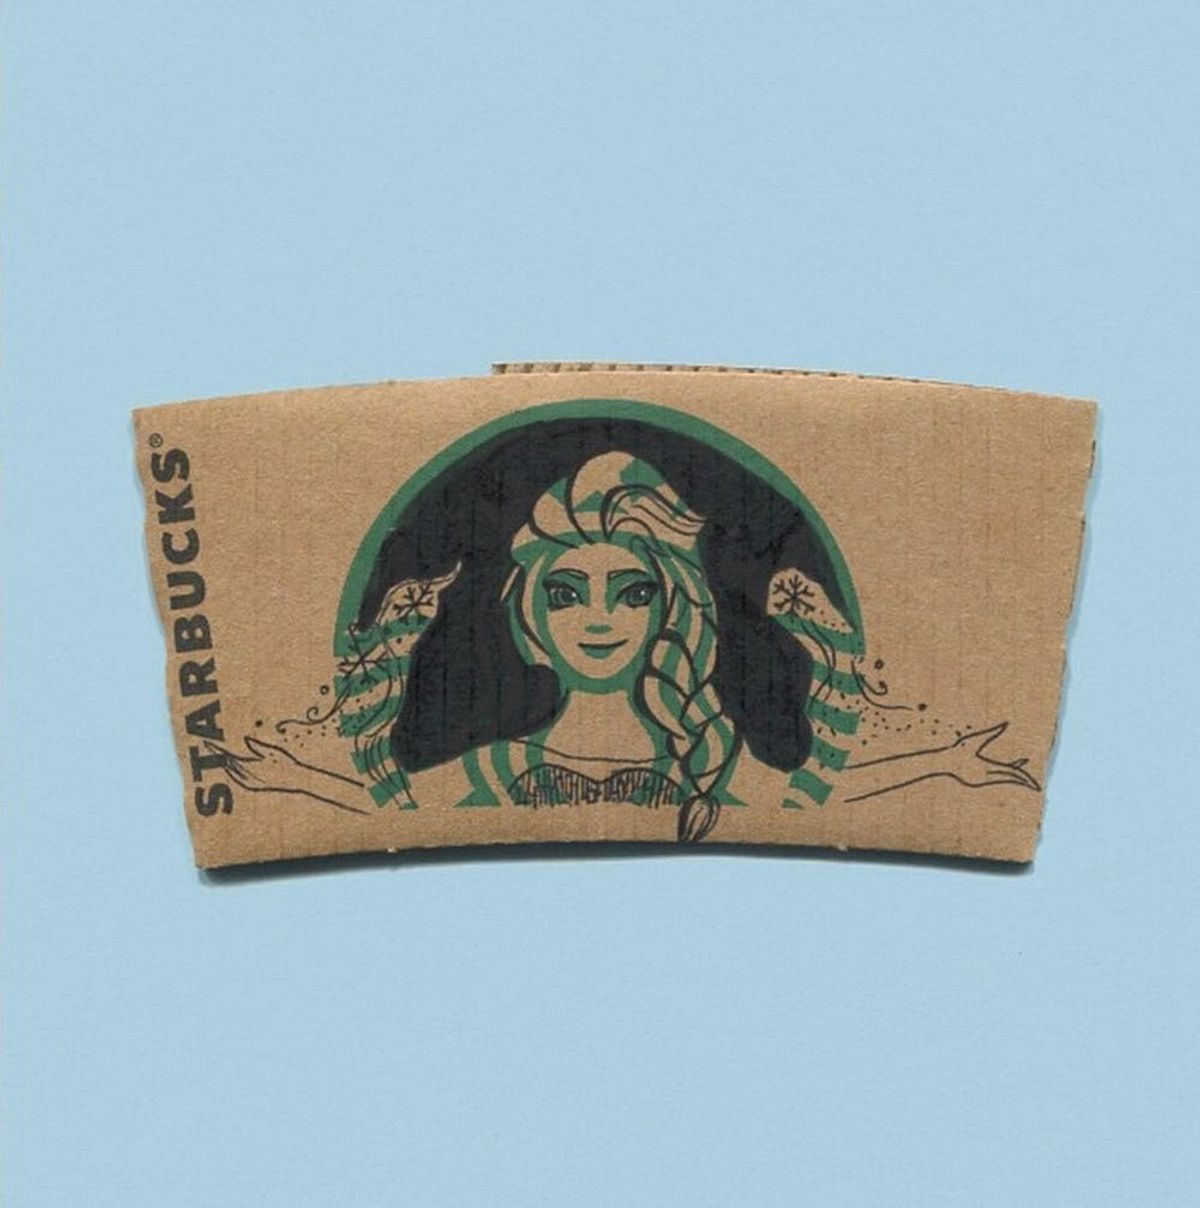 Starbucks Sleeves Are Getting a Makeover from This Artist